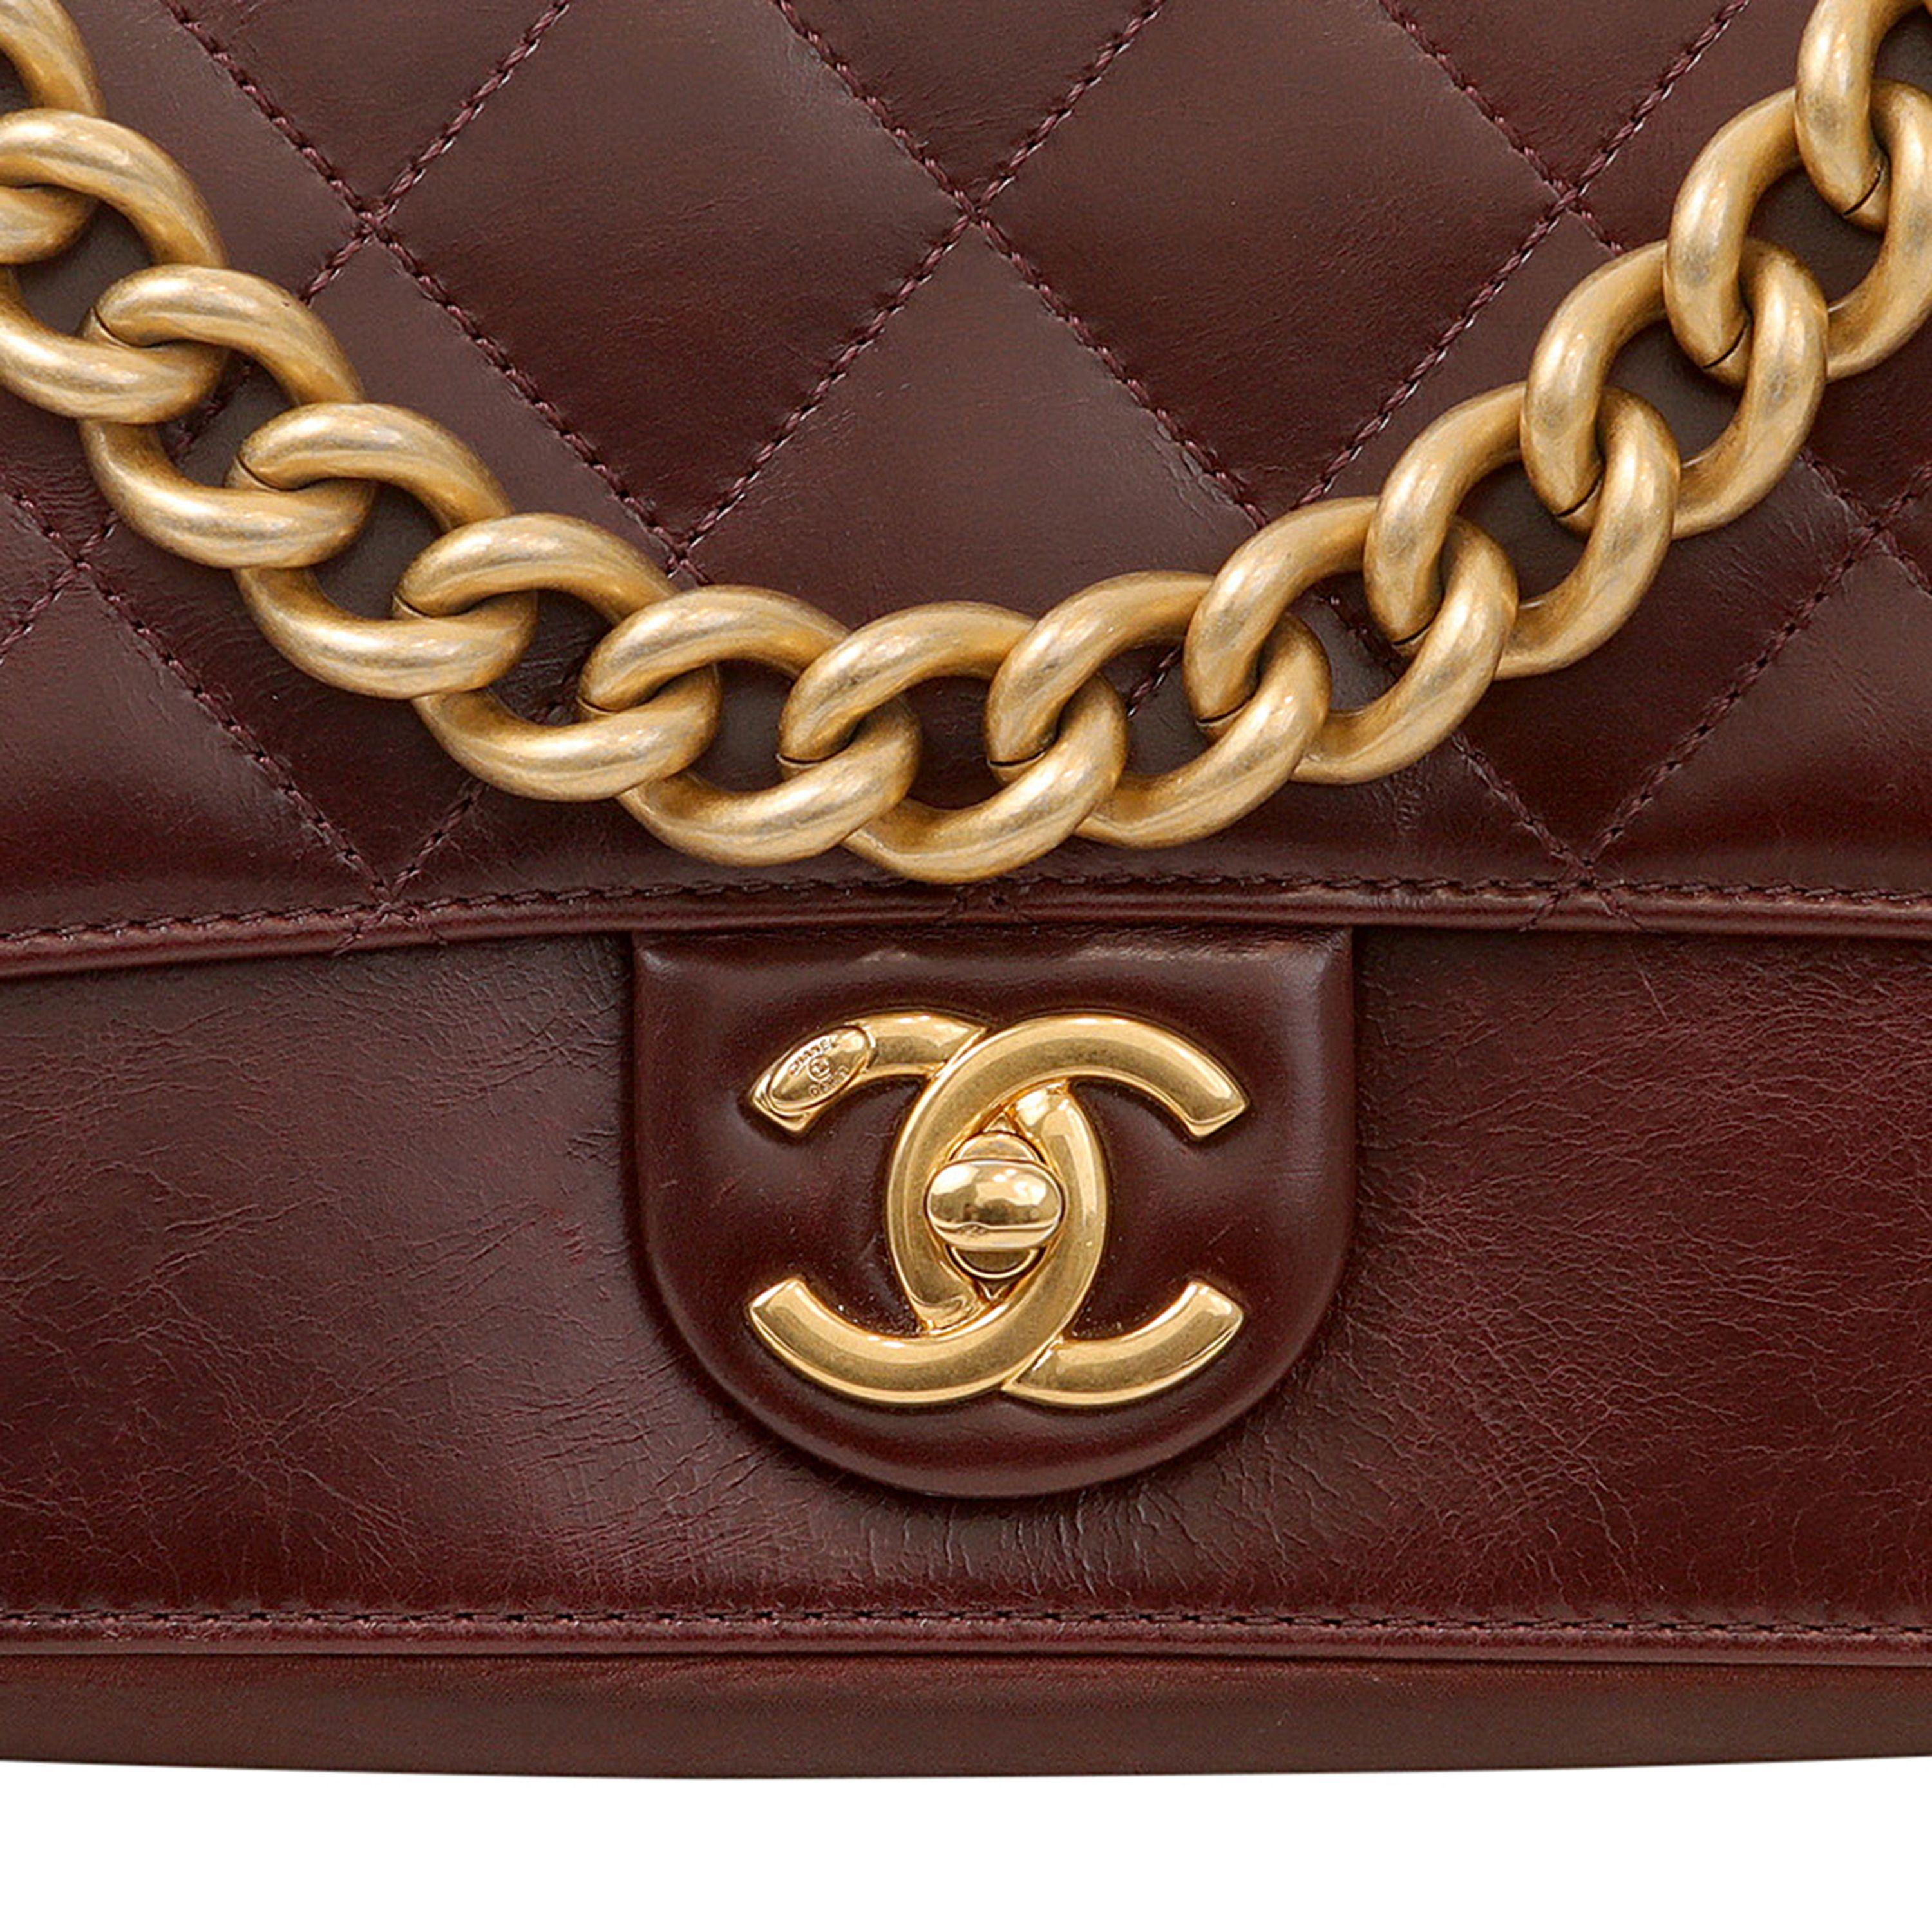 This authentic Chanel Burgundy Lambskin and Suede Accordion Flap bag is in excellent condition. 2016 collection.  Rich burgundy lambskin with suede bottom and interior.  Quilted top flap with matte gold hardware interlocking CC clasp.   Chunky chain